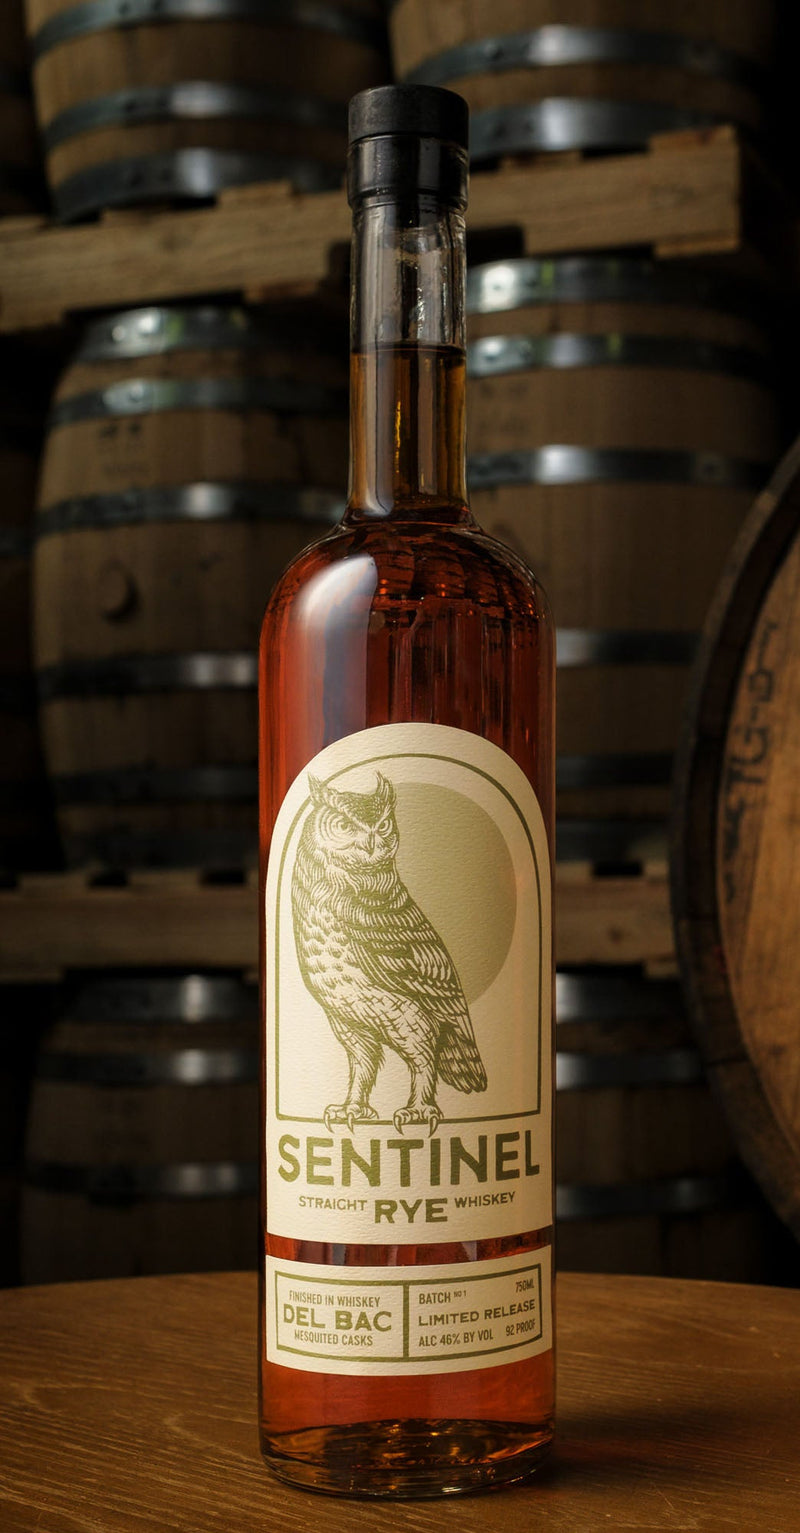 Load image into Gallery viewer, Sentinel Rye Finished in Whiskey Del Bac Mesquited Casks - Main Street Liquor
